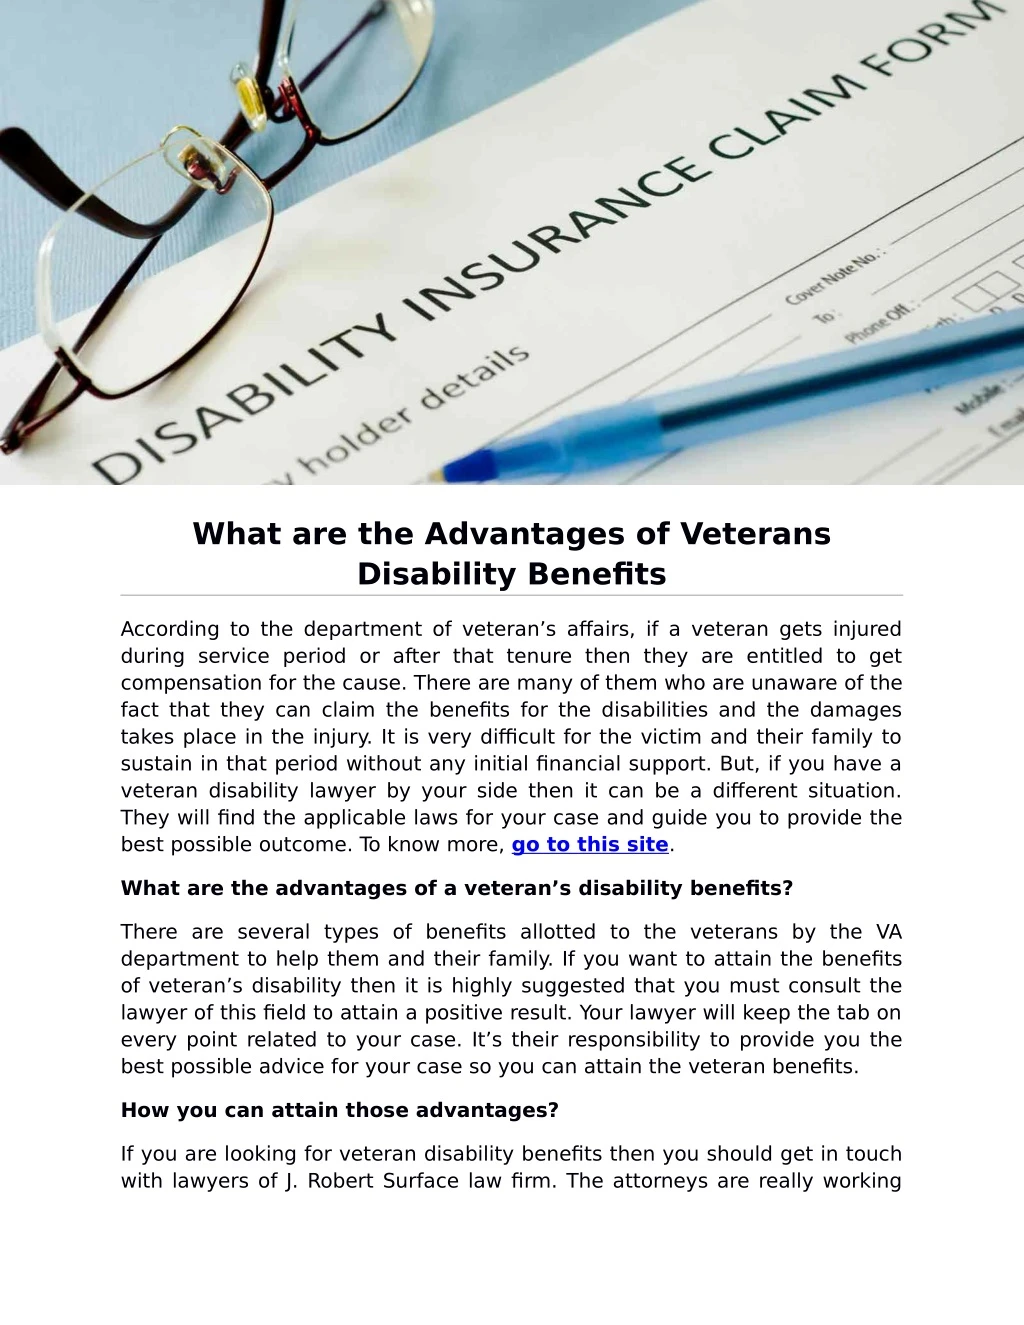 what are the advantages of veterans disability